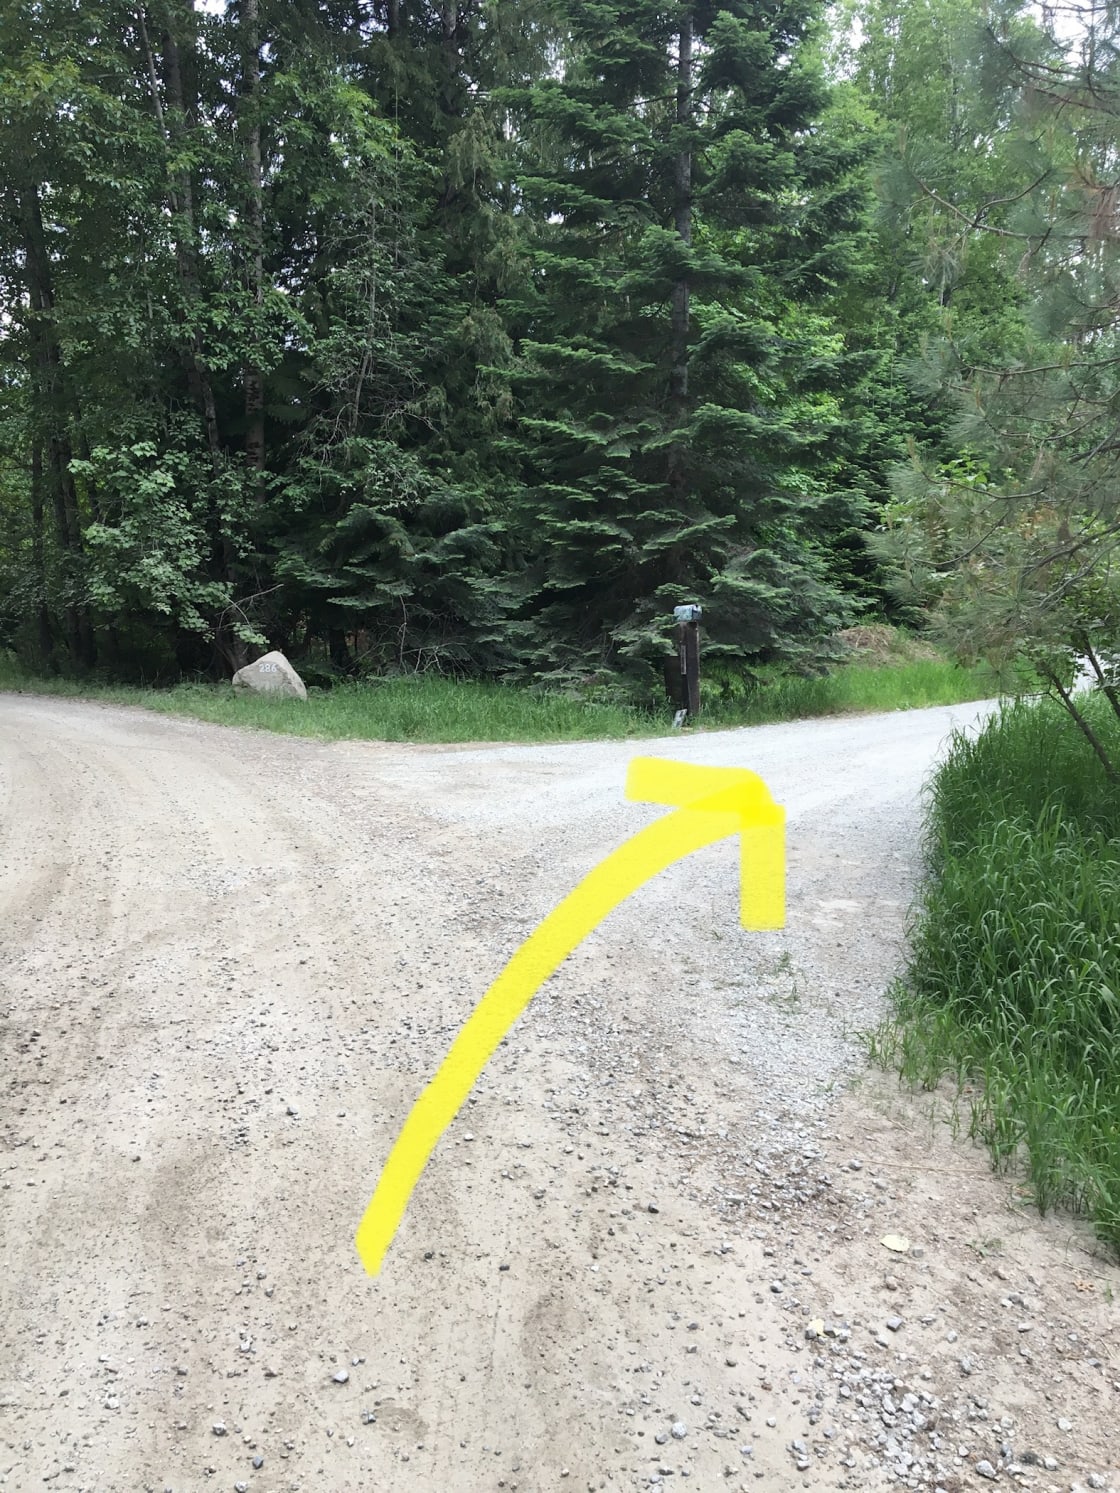 Turn right off of Wood View rd into the driveway just past the pond. There is a large Rock after the driveway with the number on it 